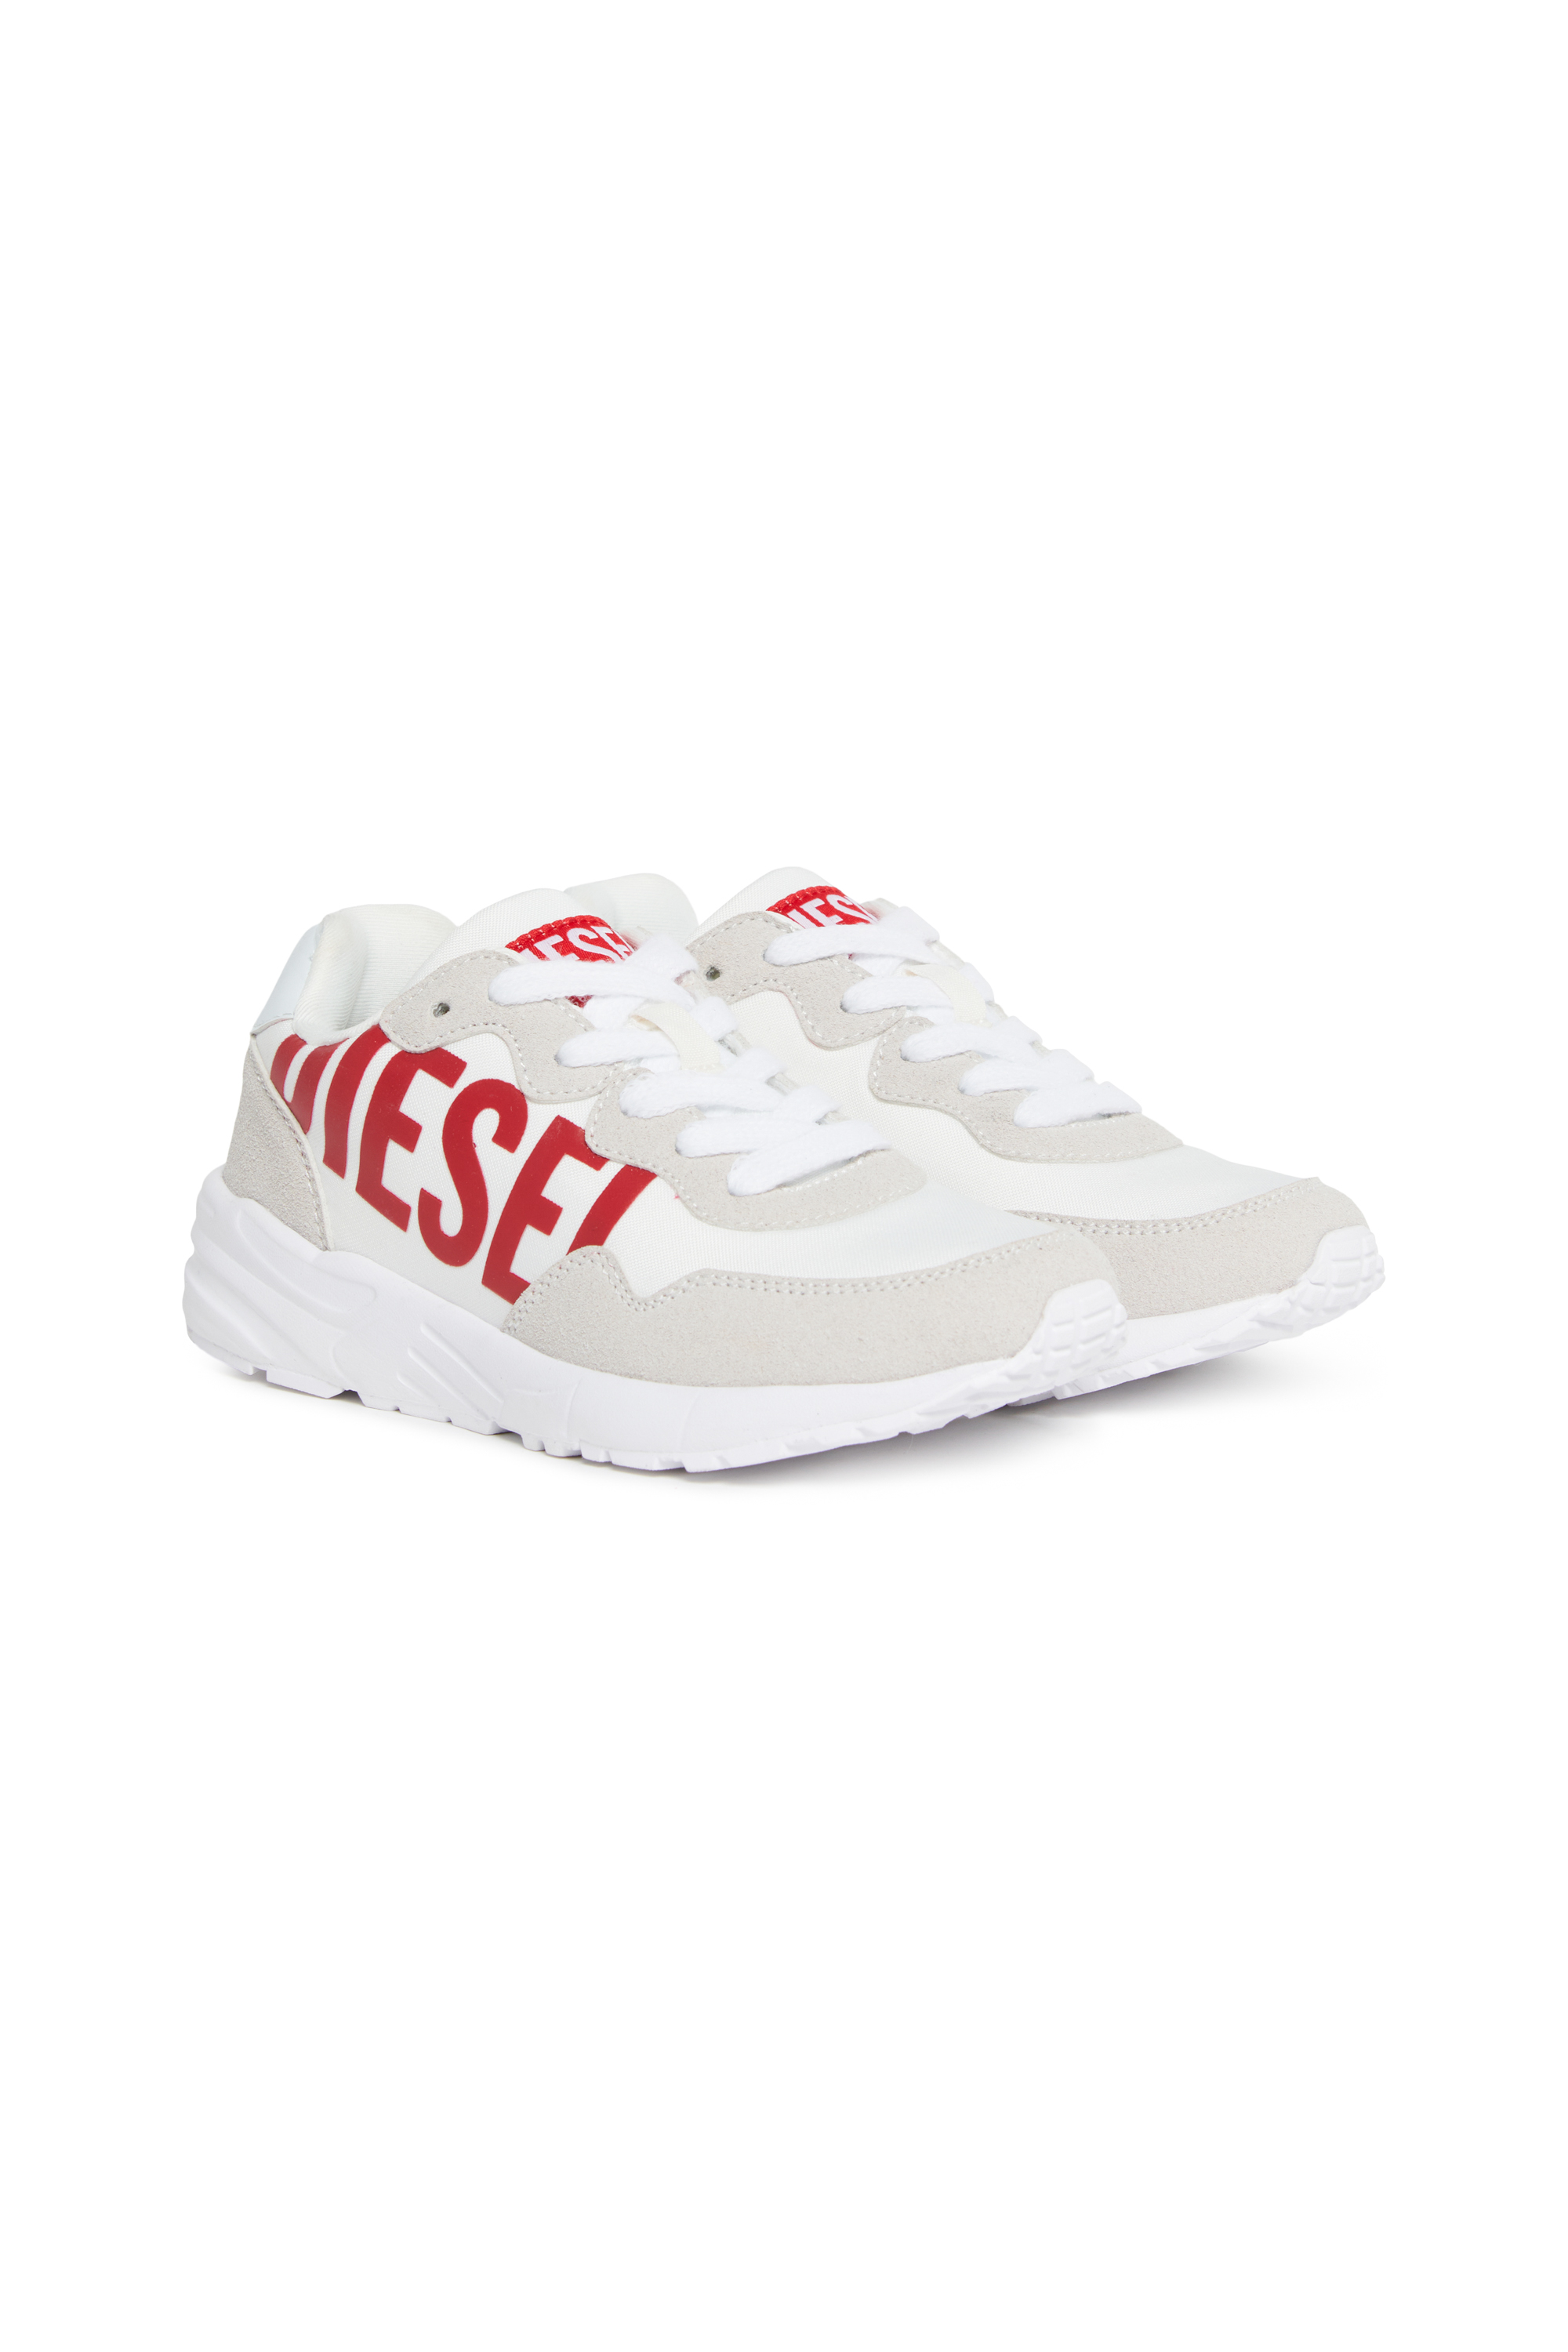 Diesel - S-STAR LIGHT LC, Unisex Nylon sneakers with shiny Diesel print in Multicolor - Image 2